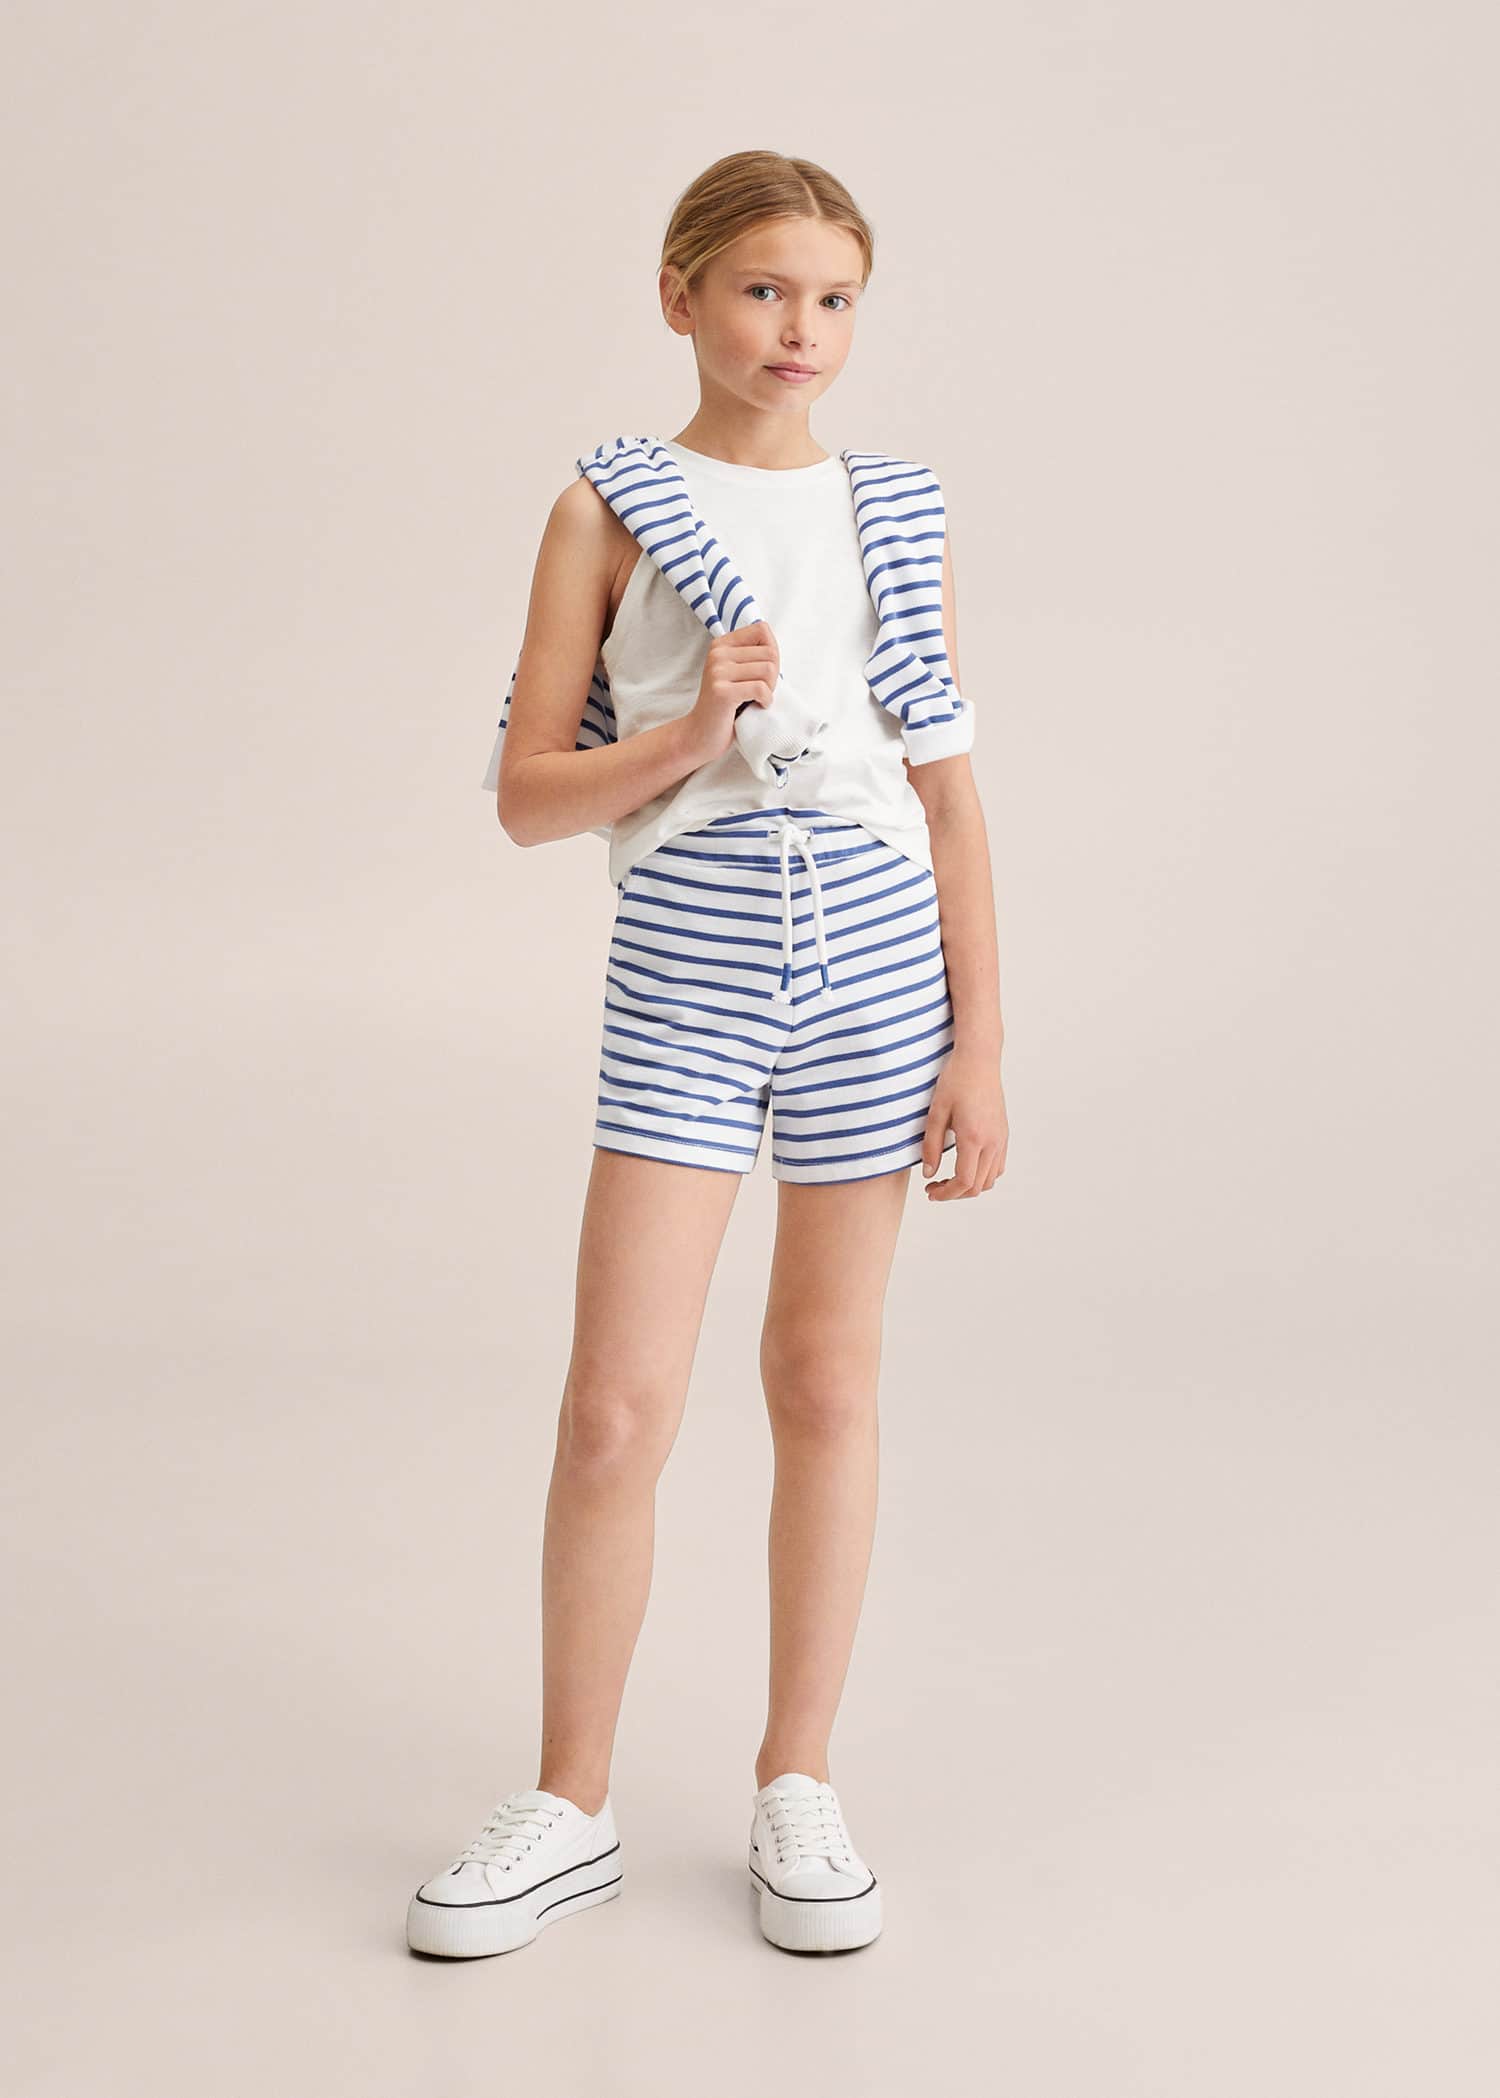 Girls's Fashion Outlet | Mango Outlet USA 童装$5,99 起SUMMER CLOSET Seasonal must-haves from $5,99 